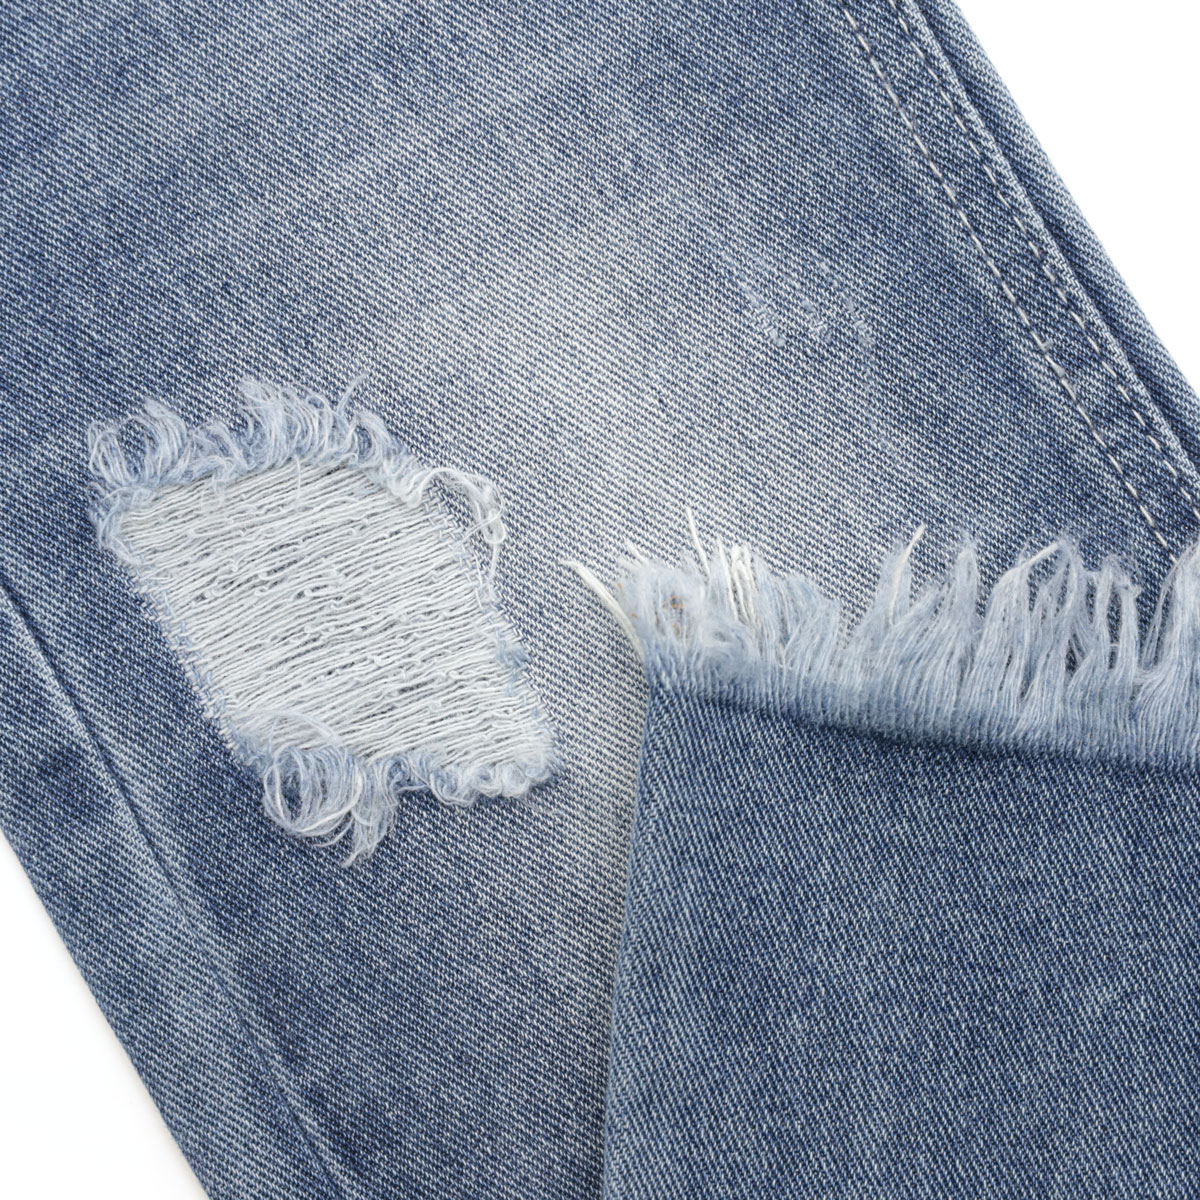 10 Useful Tips on Non-stretch Denim Fabric 1